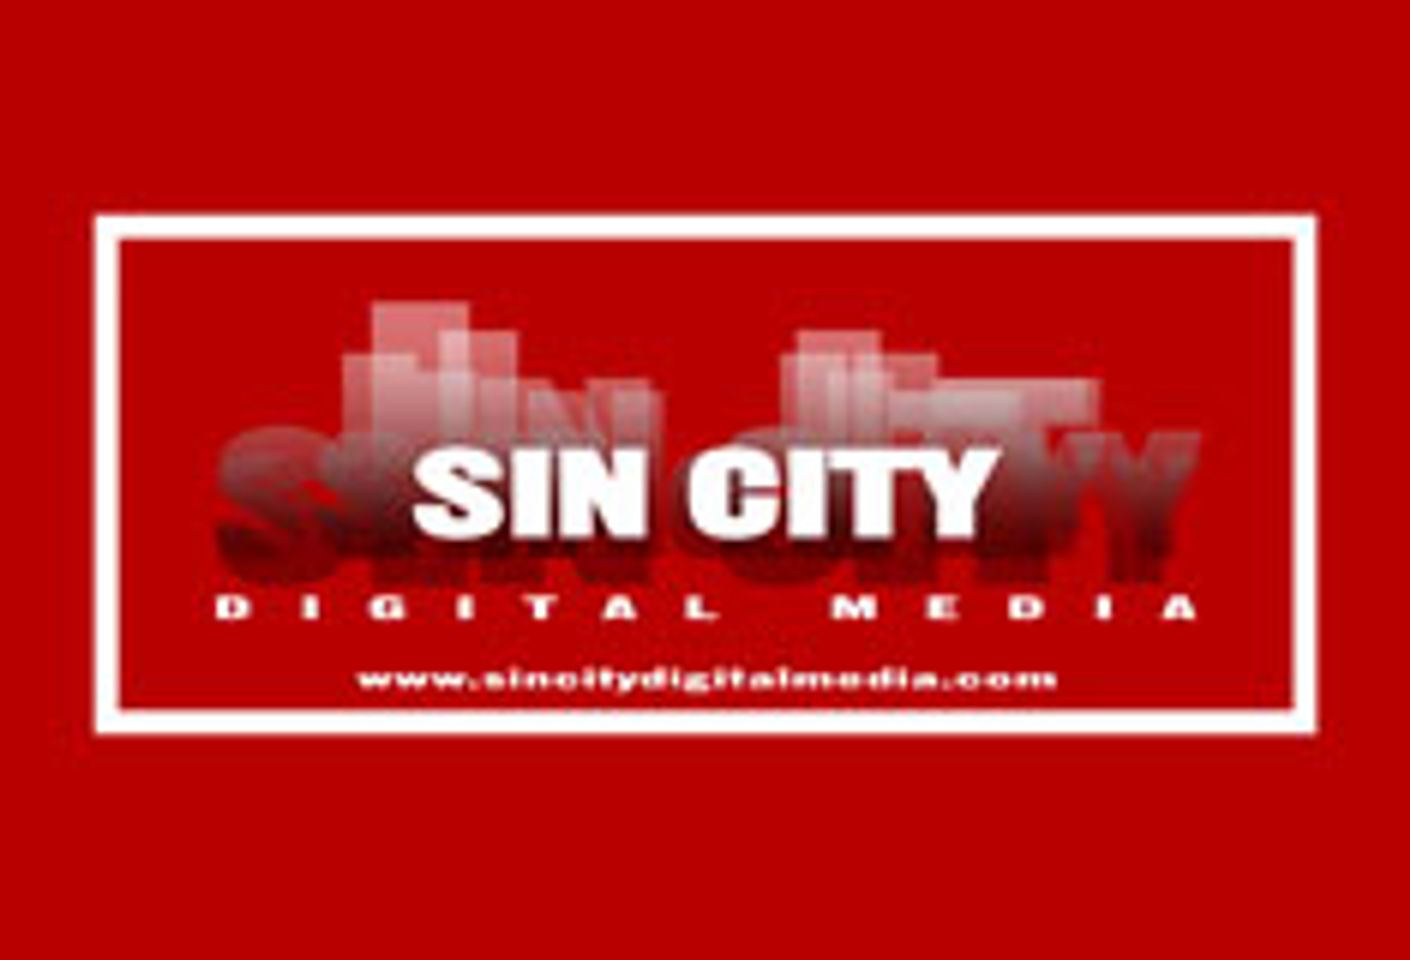 Sin City Expands into Digital Media Services